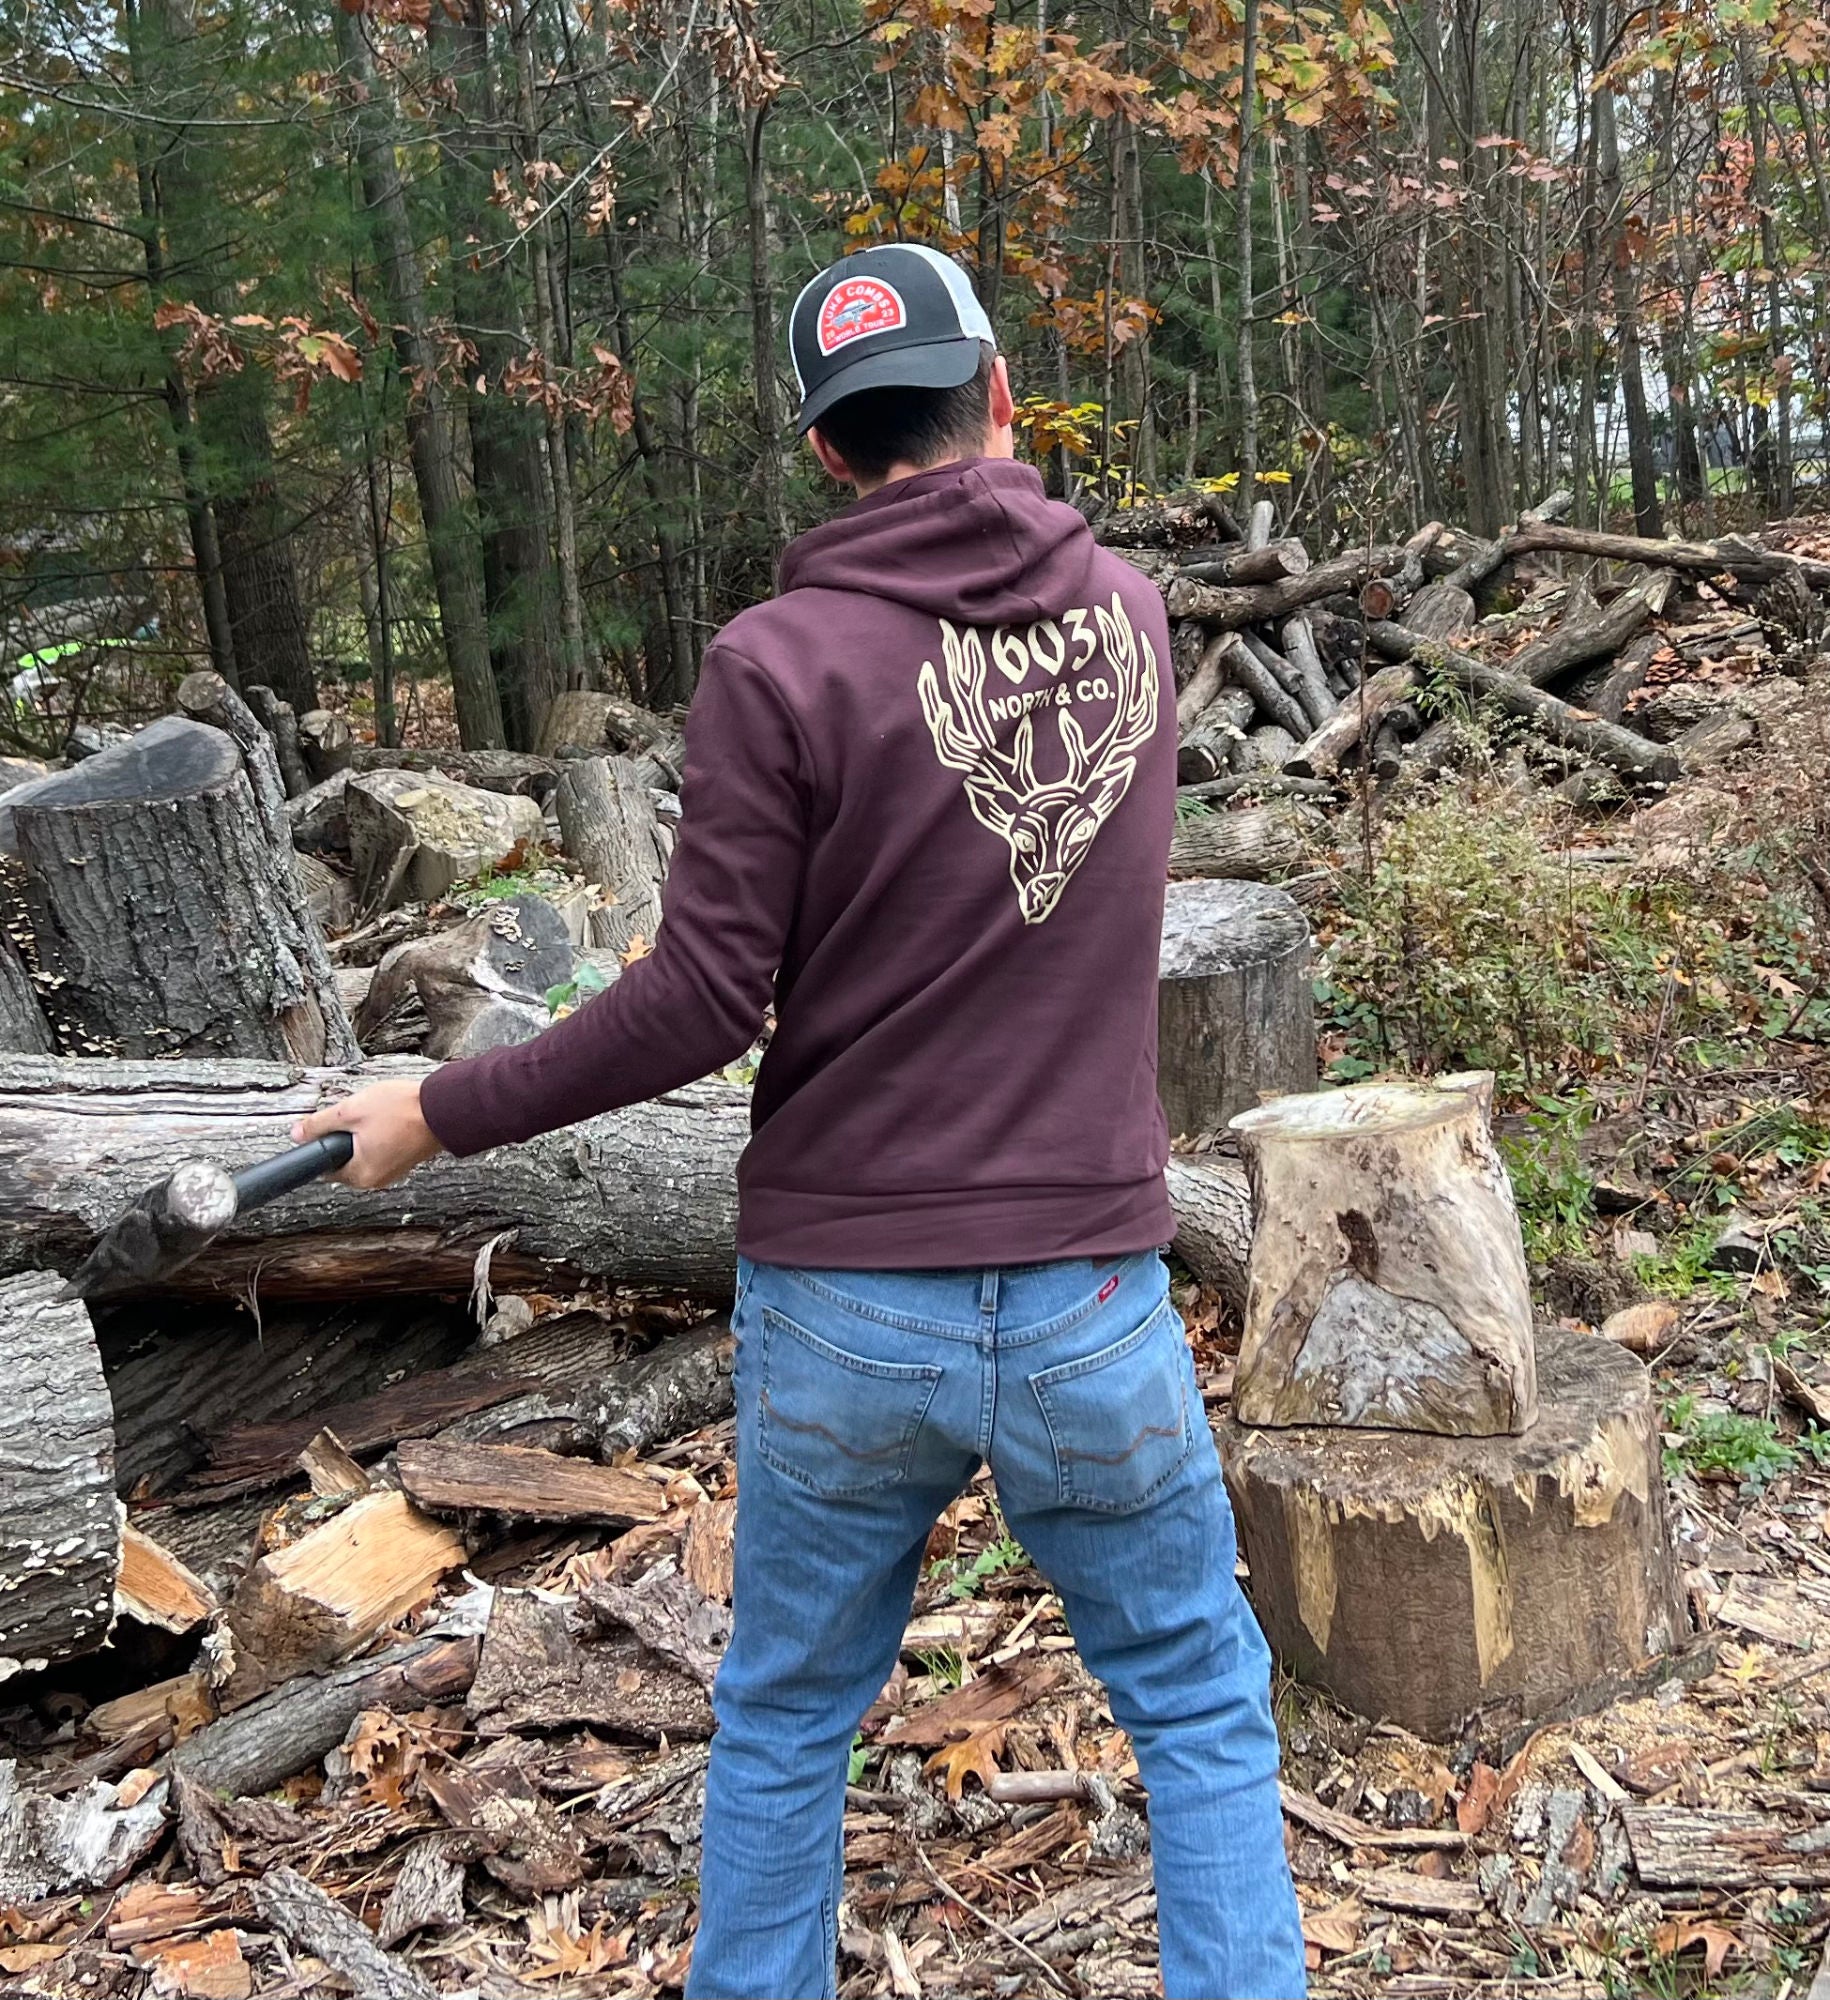 Swinging a hammer wearing the an oxblood-colored hoodie with a large deer design printed on the back.